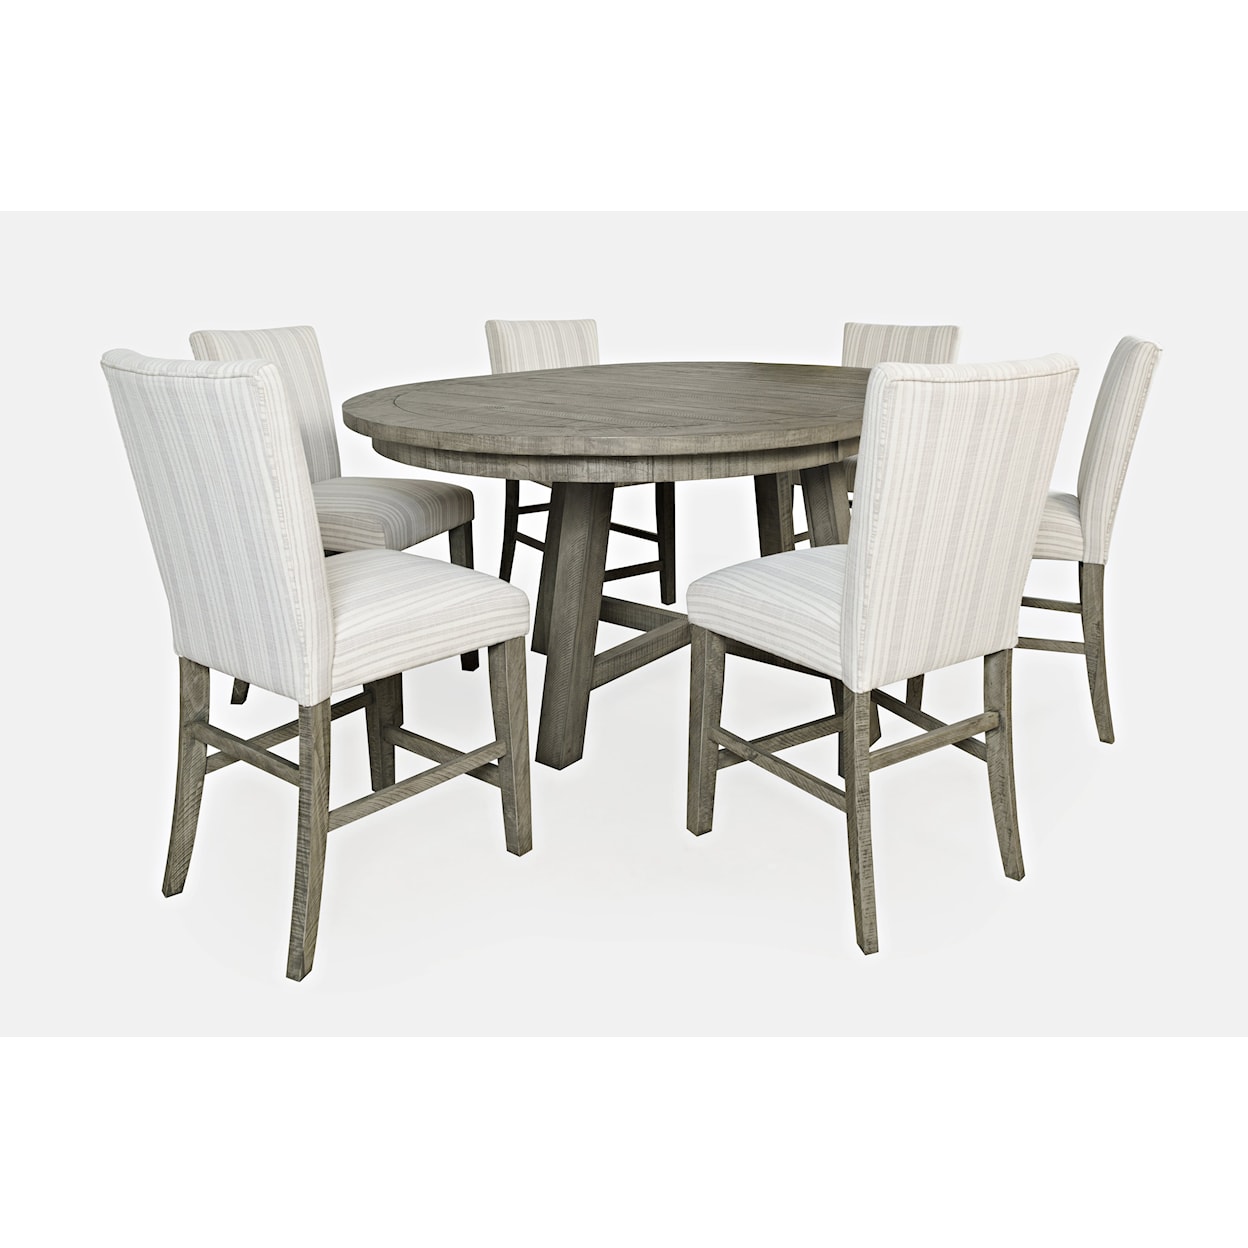 Jofran Telluride Counter Height Dining Table